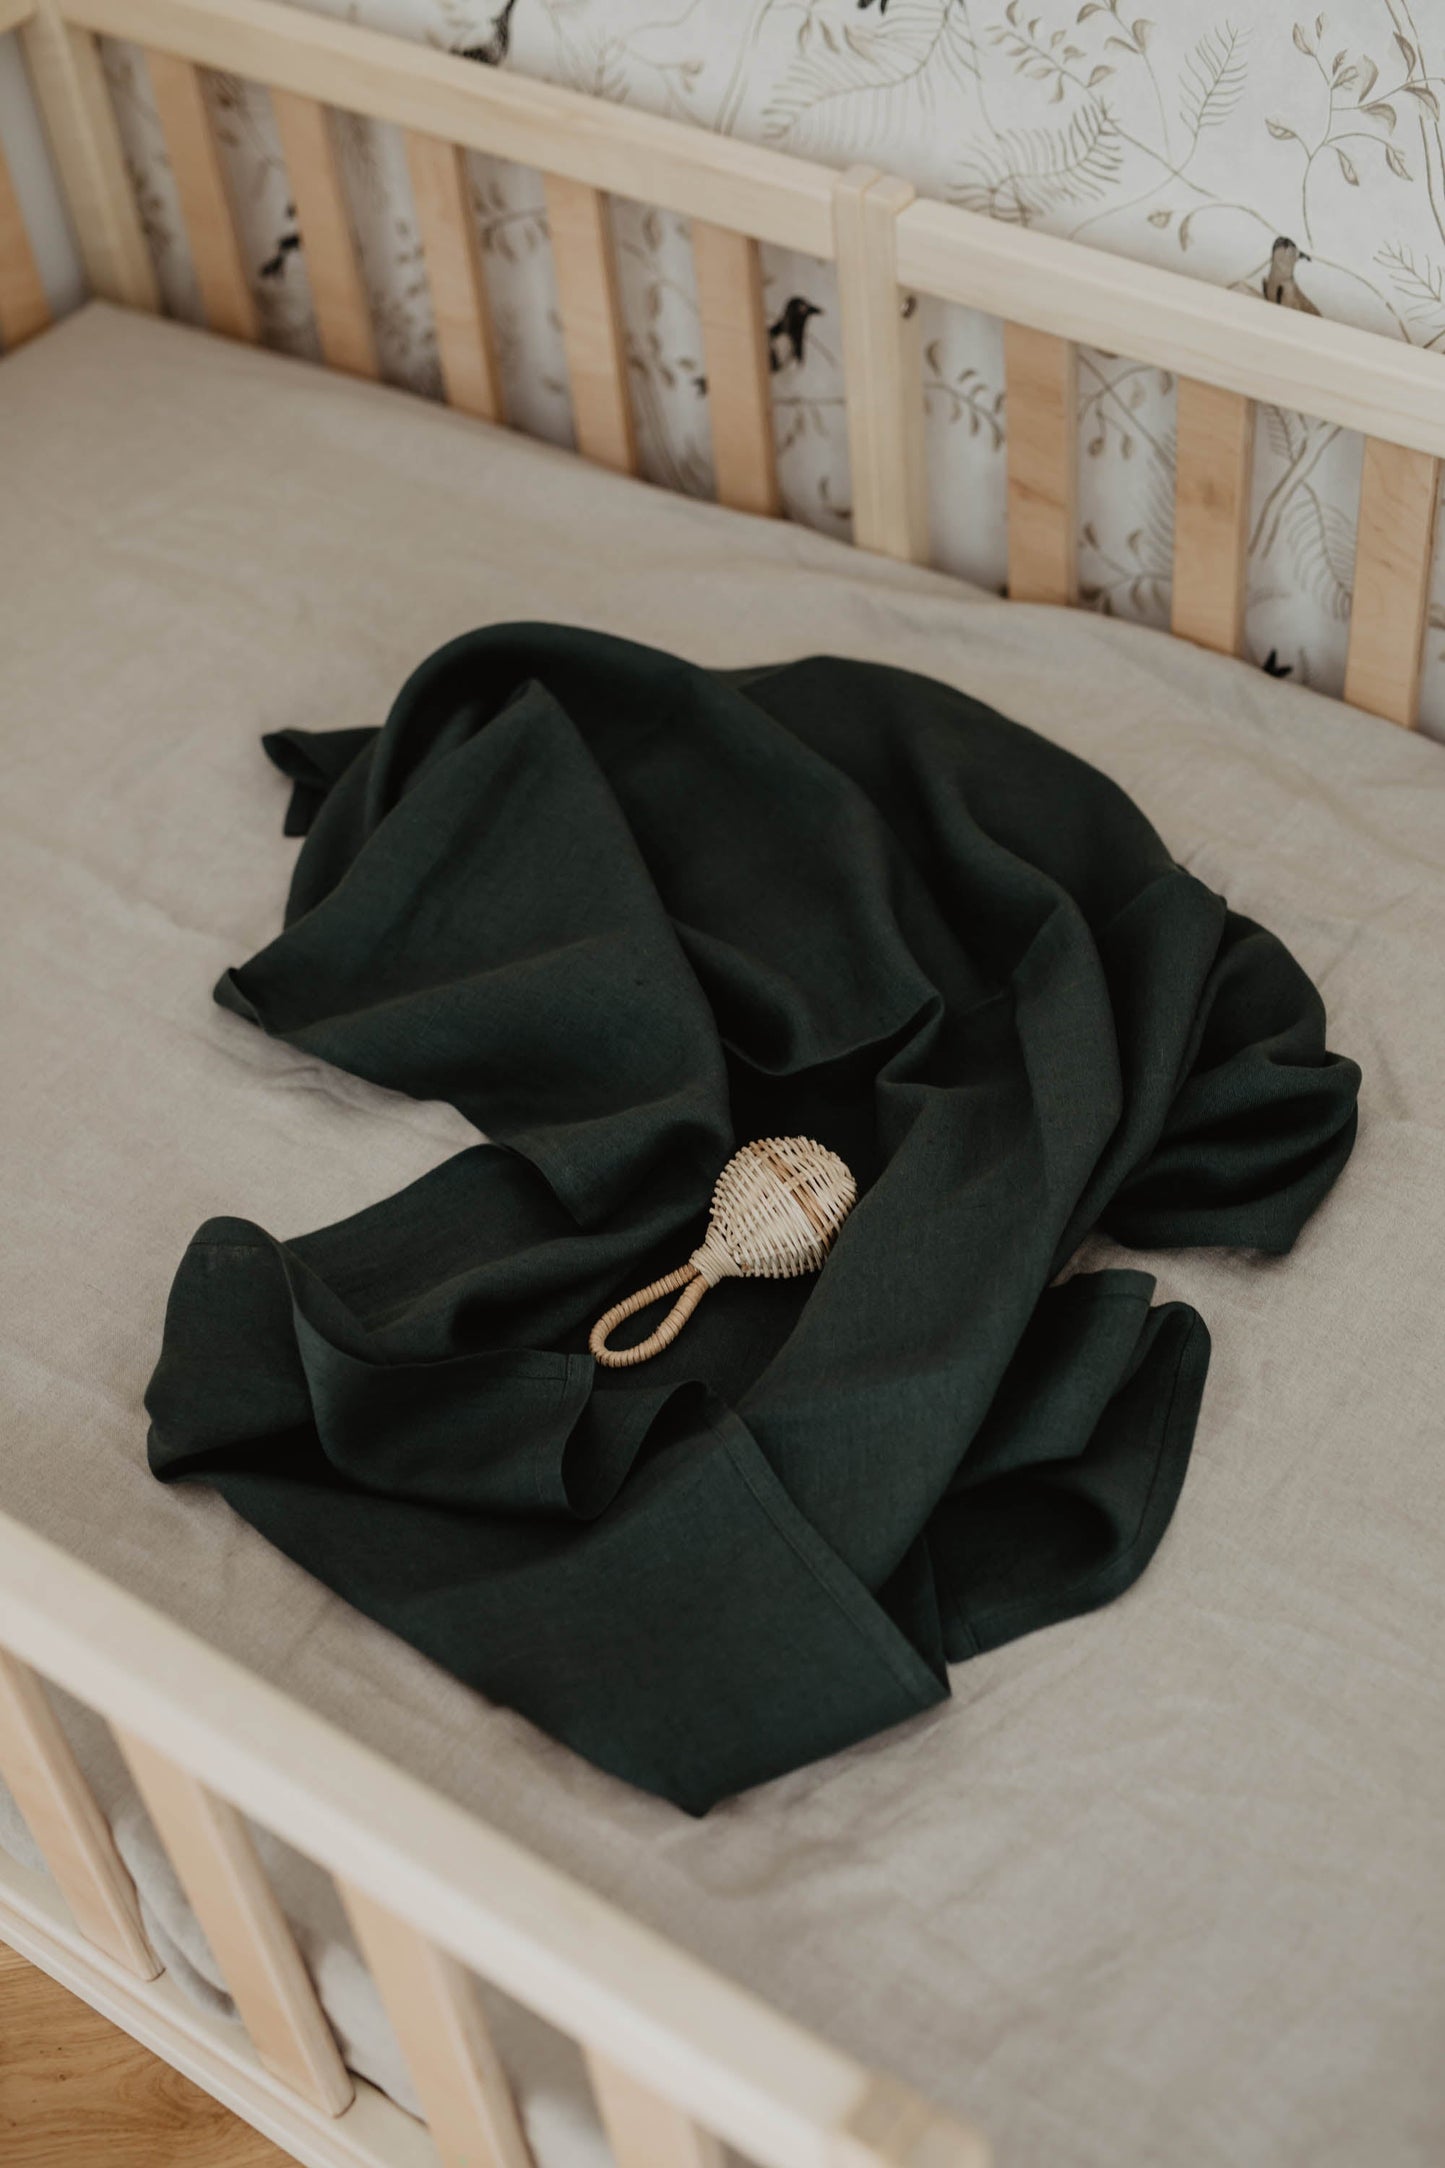 Linen baby swaddle